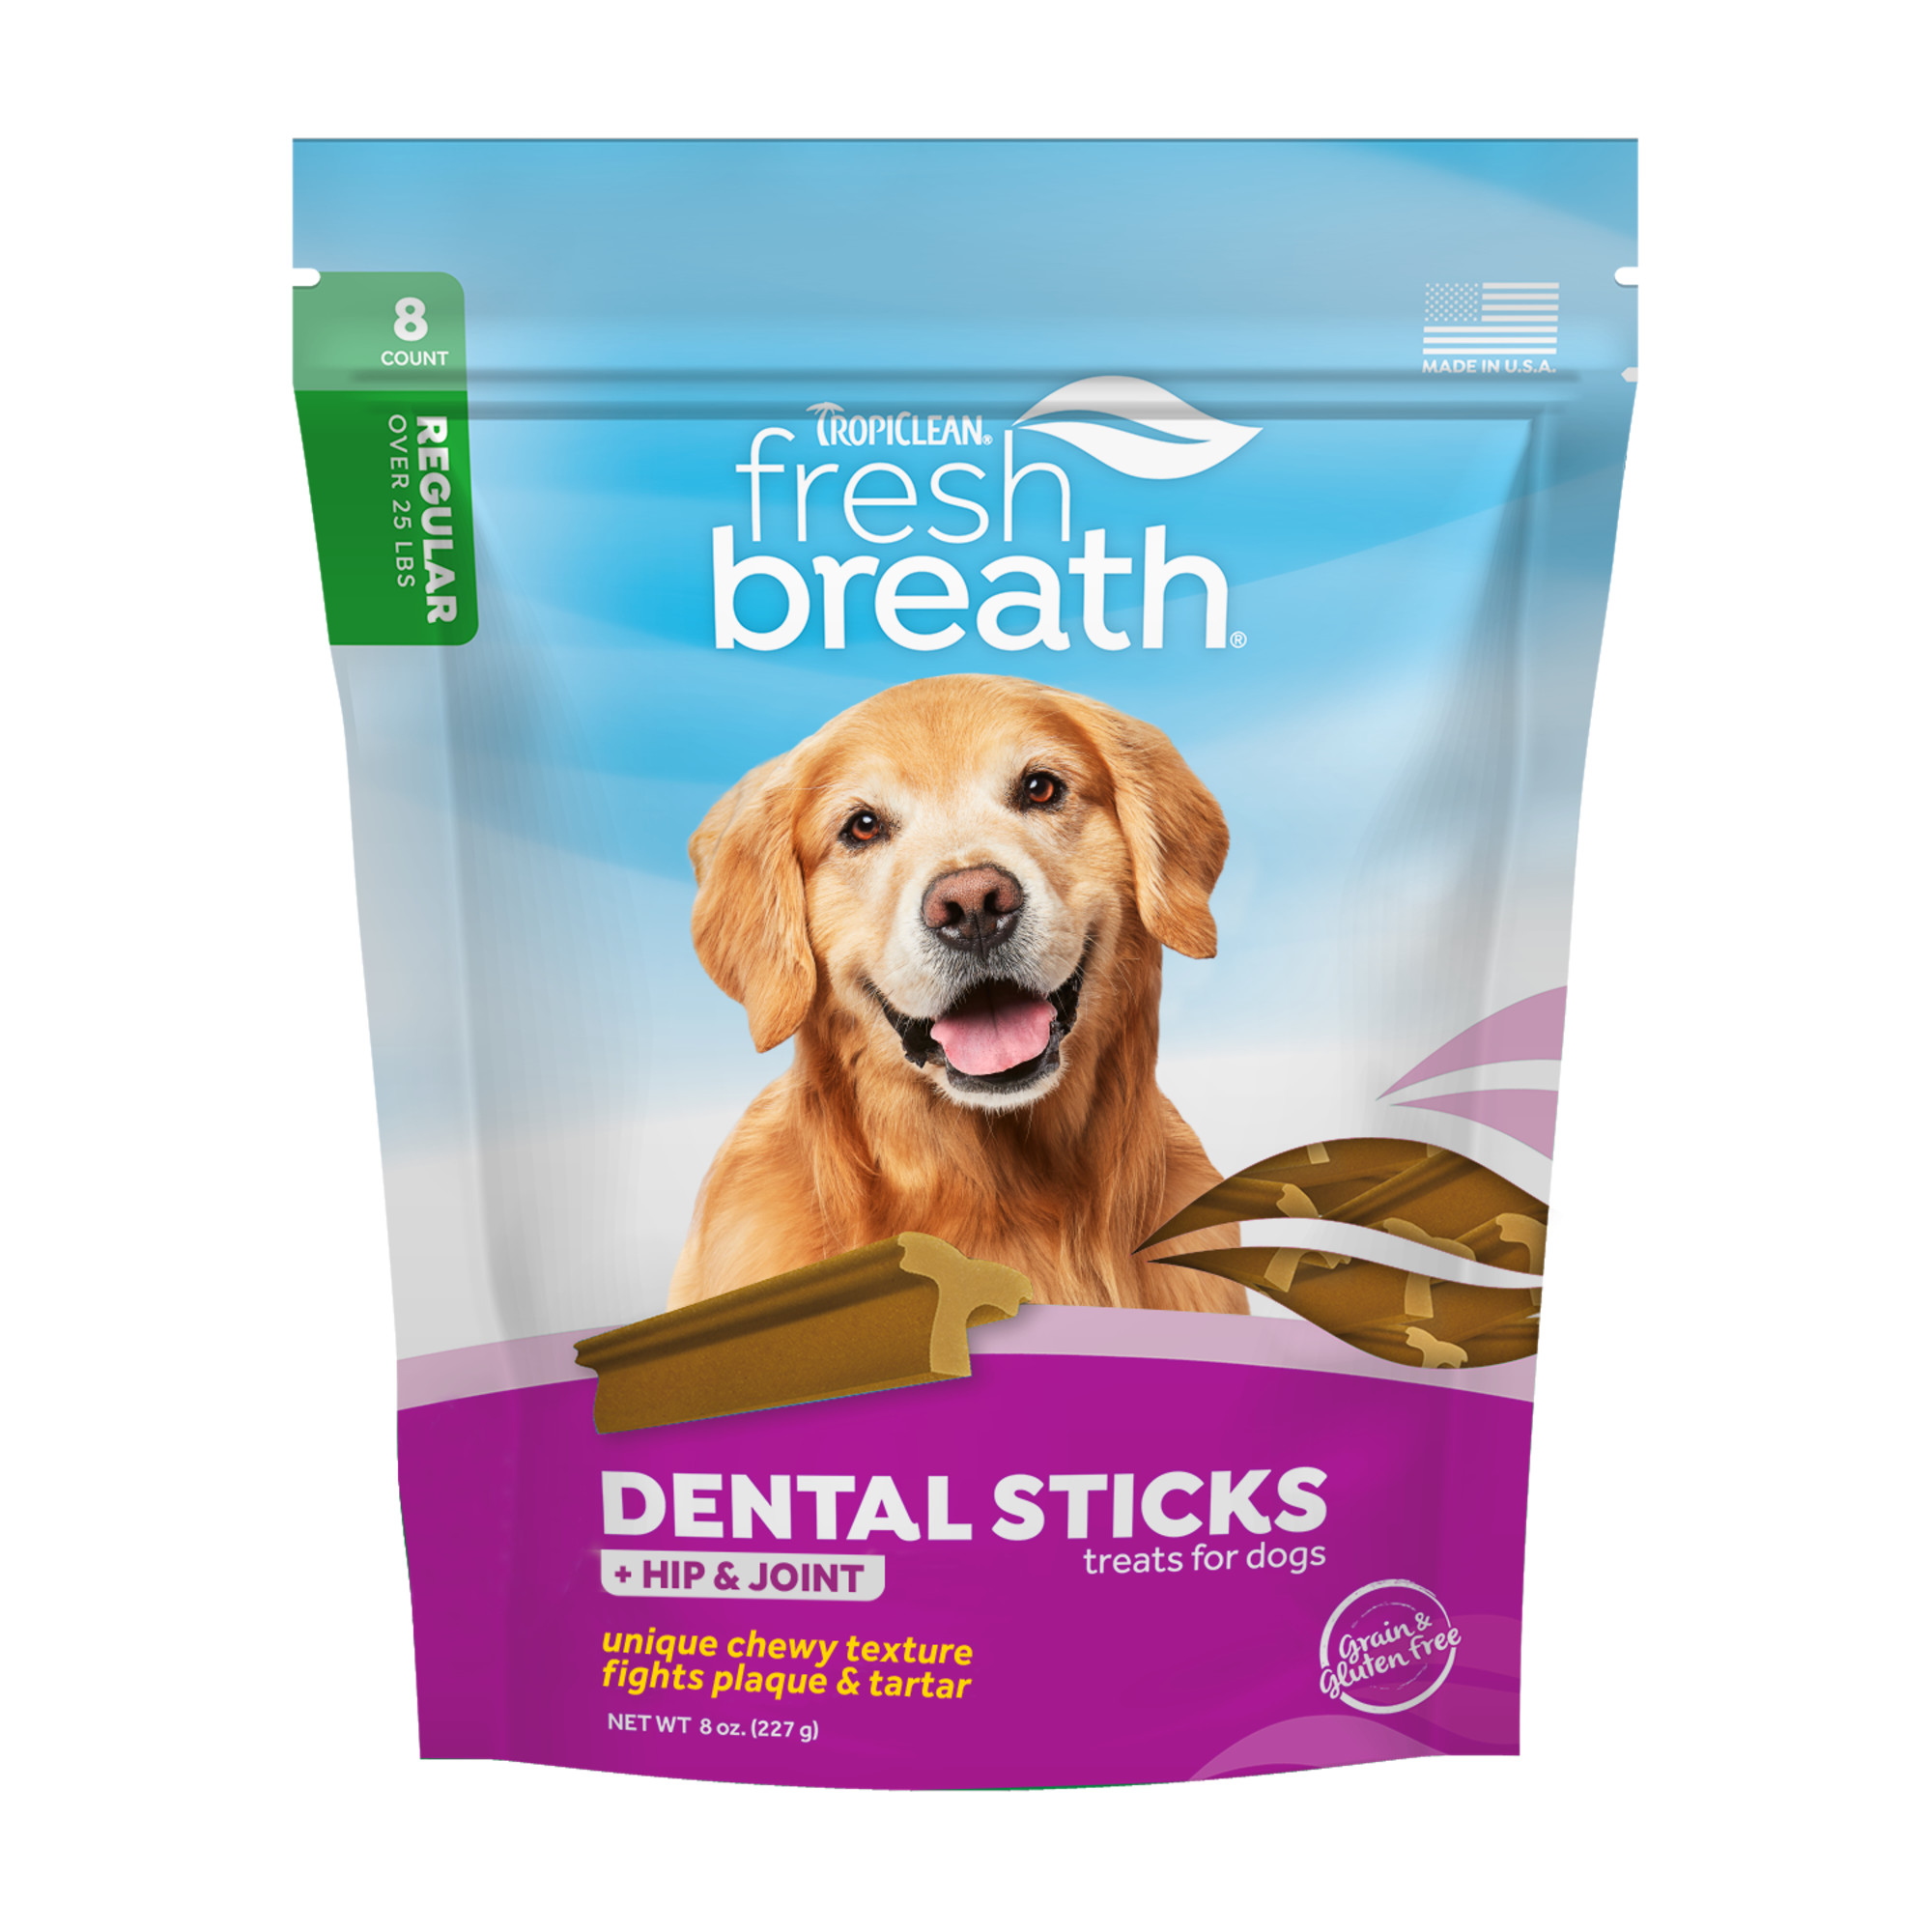 Dental Sticks Plus Hip & Joint for Large Dogs